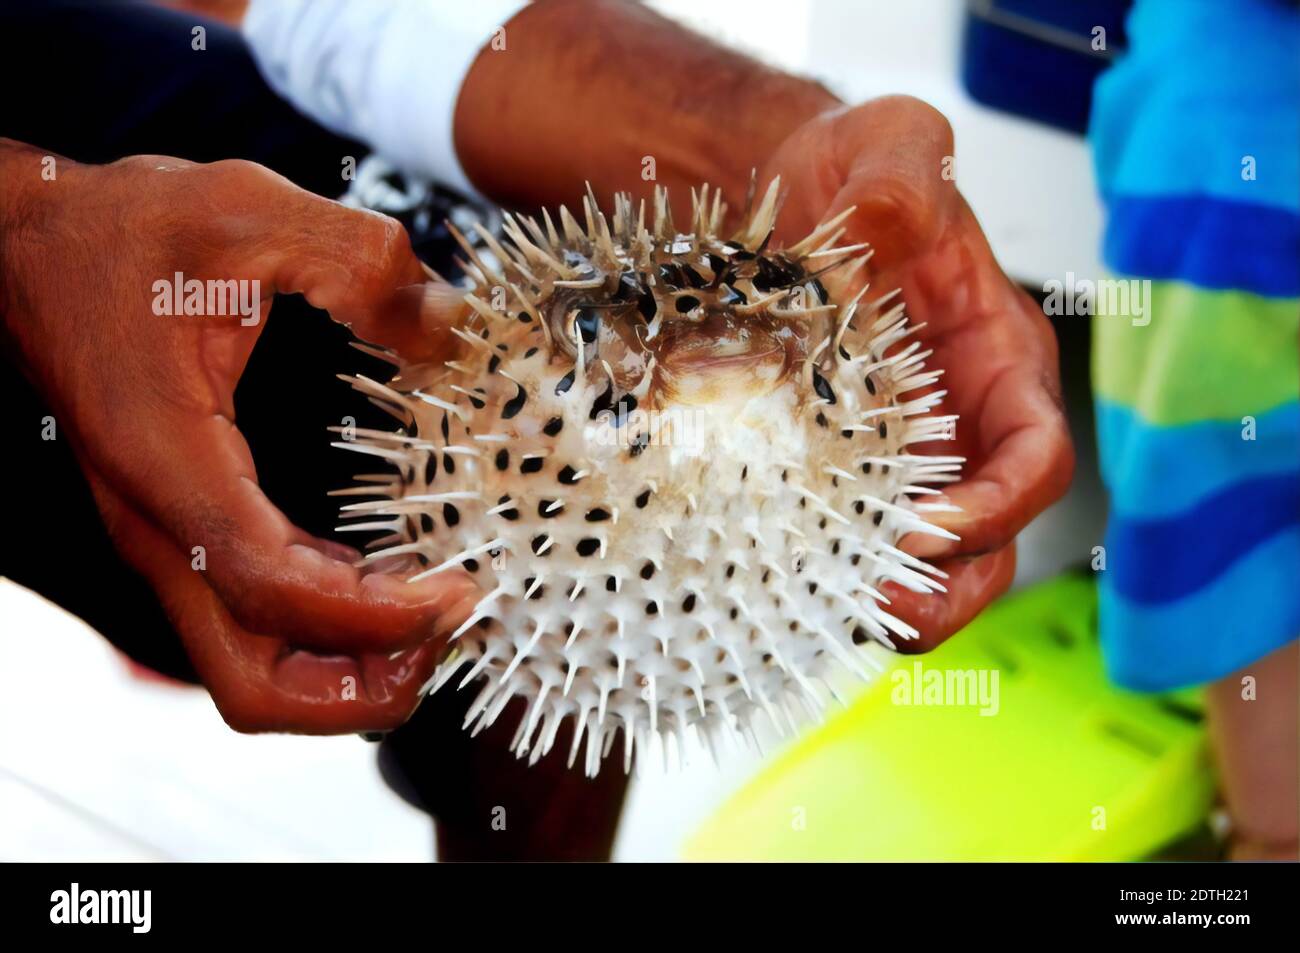 Midsection Of Man Holding Puffer Fish Stock Photo - Alamy